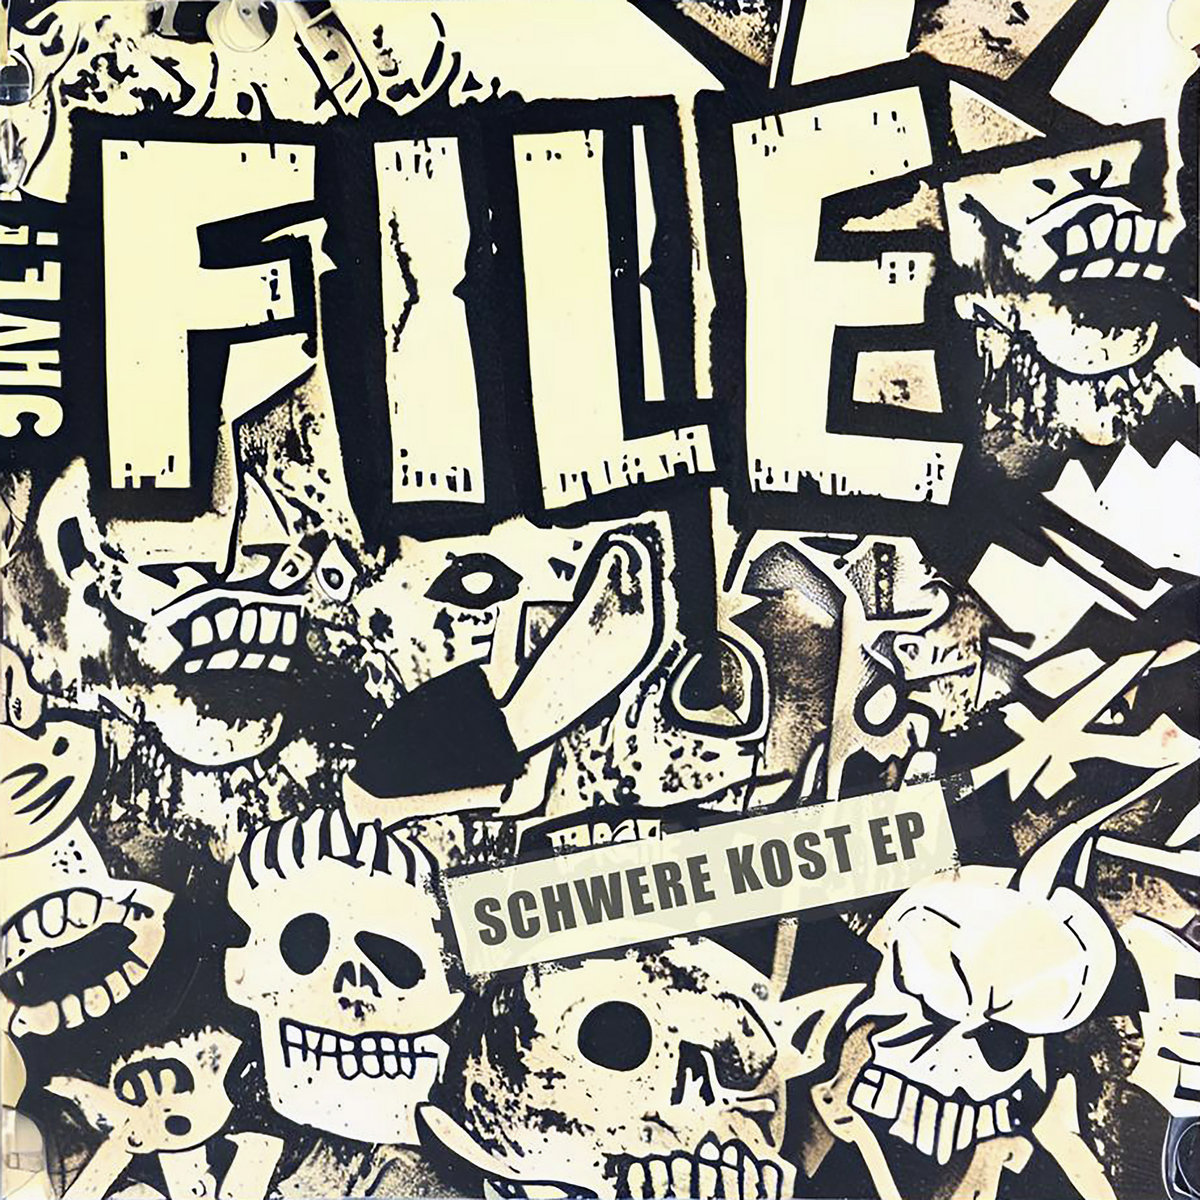 file metal schwere kost ep band